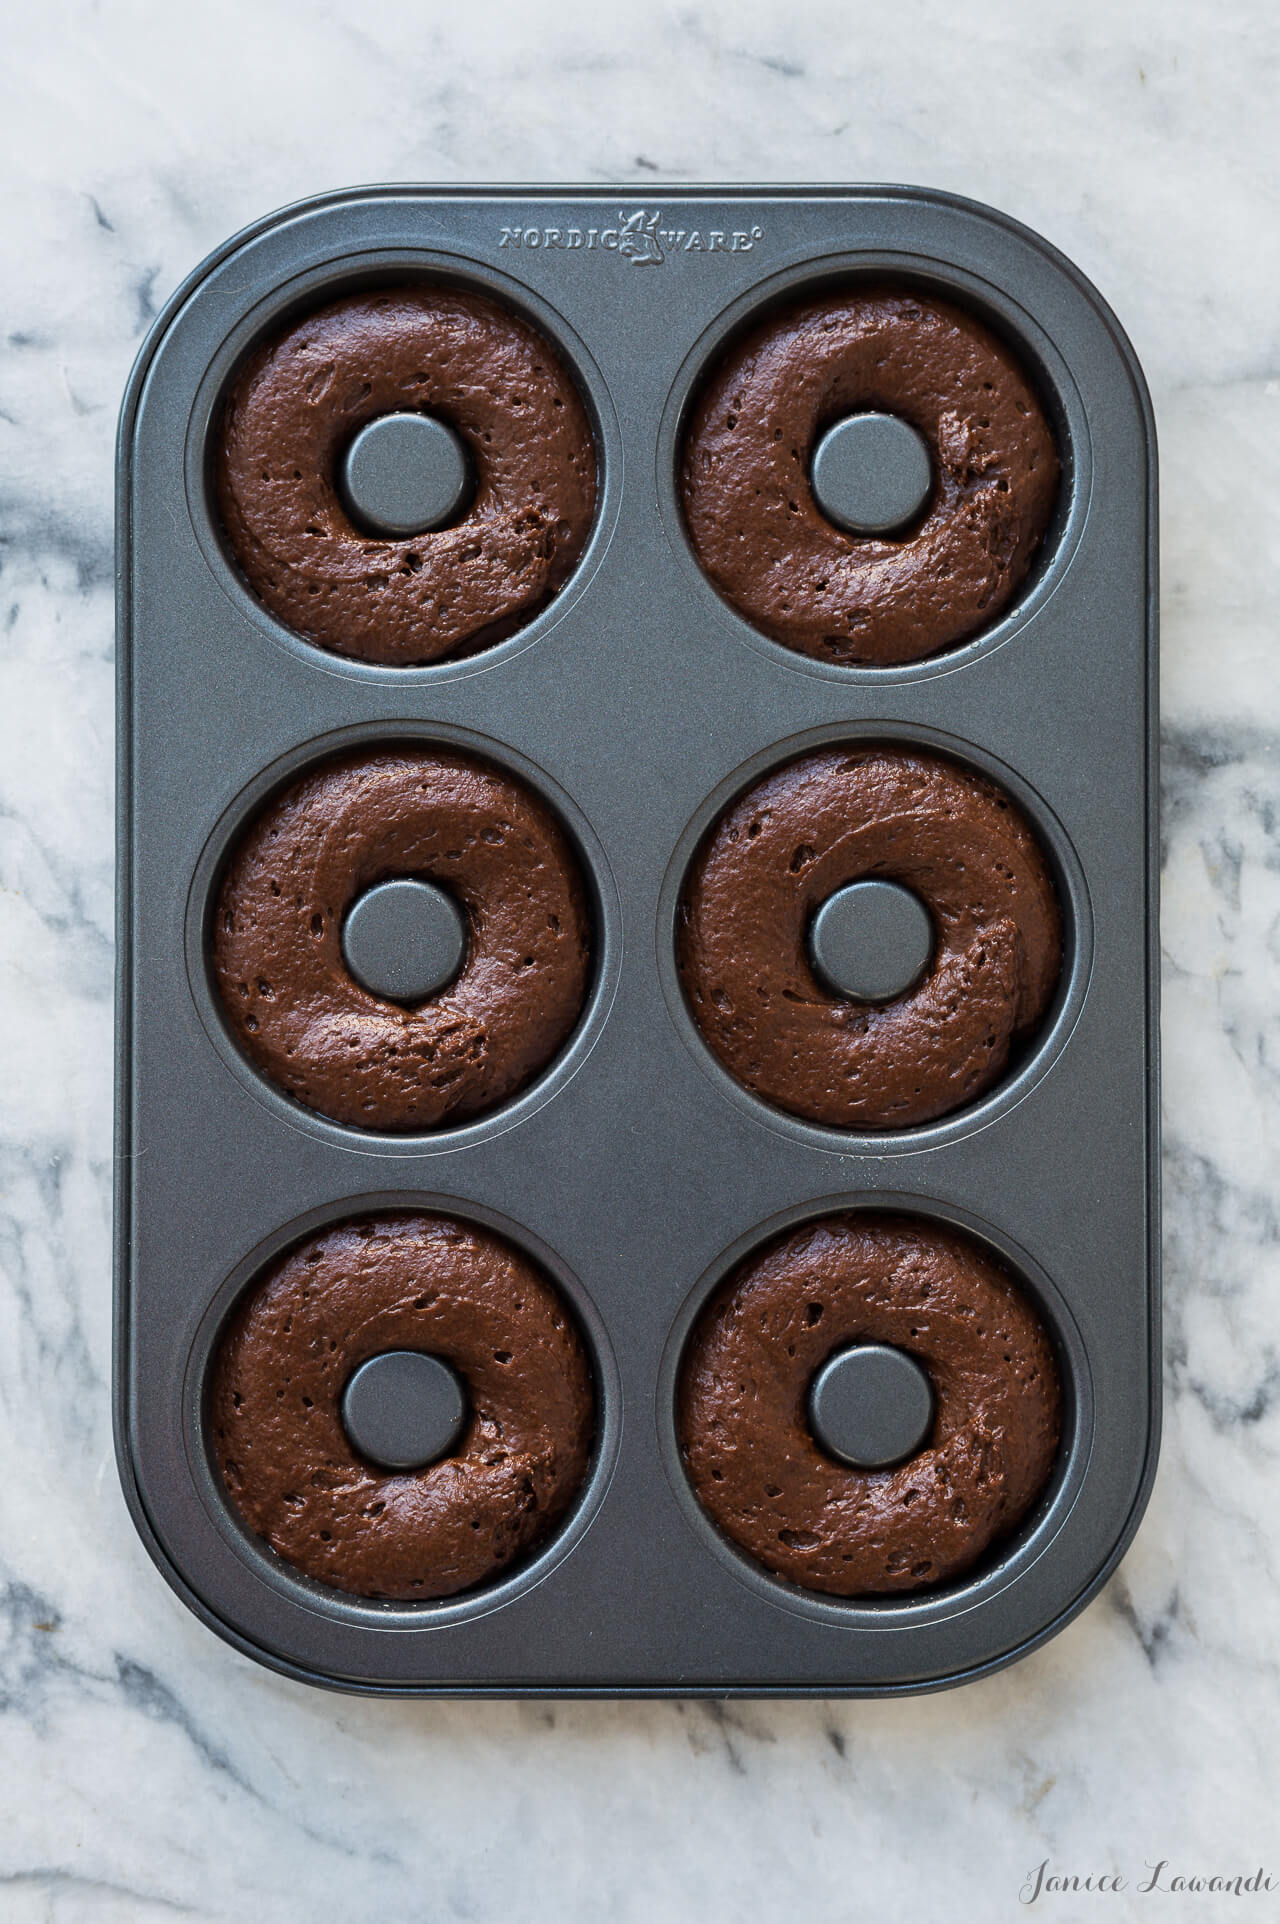 Baked Chocolate Donuts in a donut pan, not fried